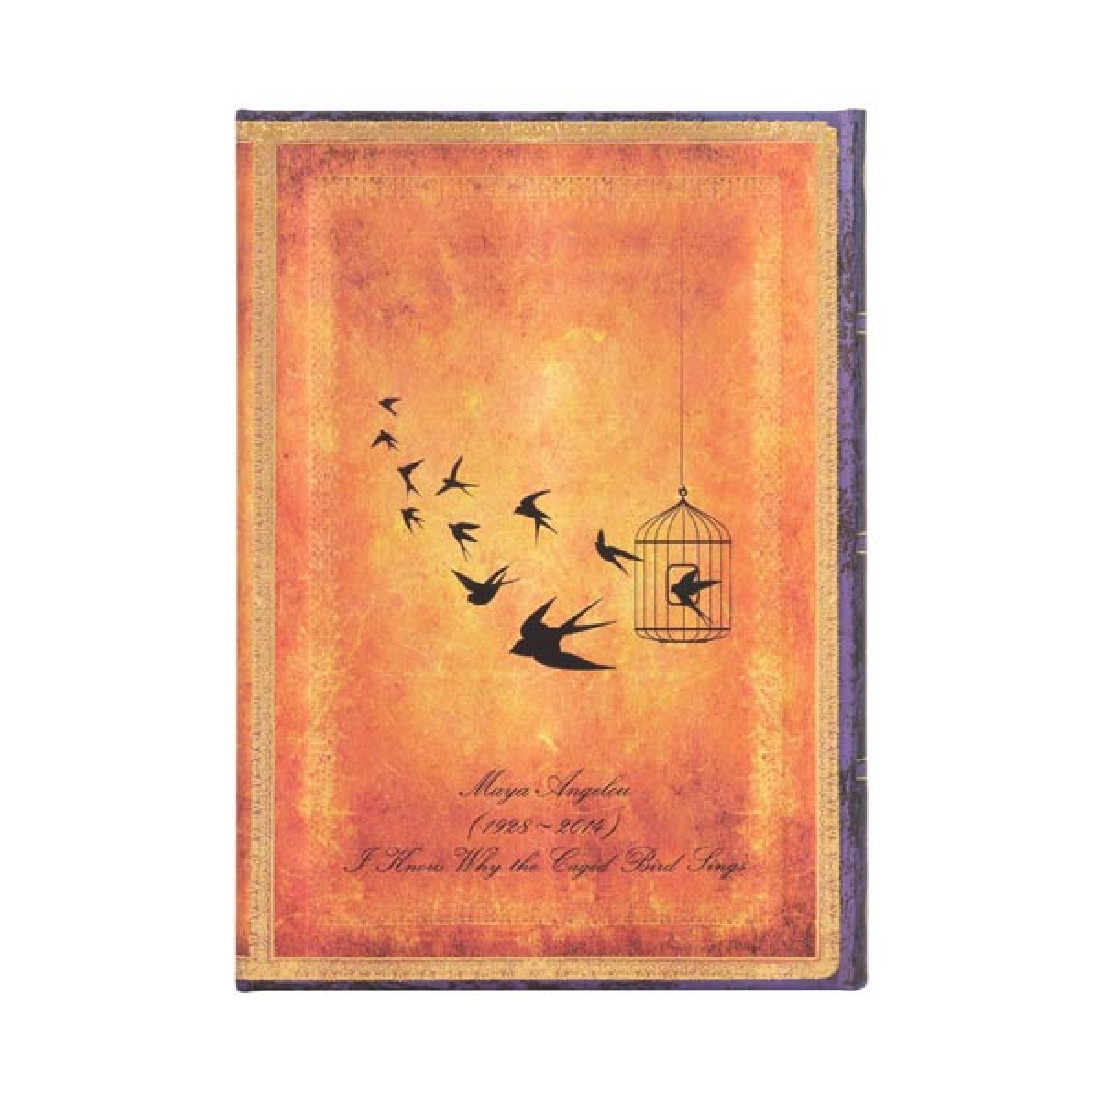 Paperblanks Angelou, I Know Why the Caged Bird Sings, Midi lined notebook